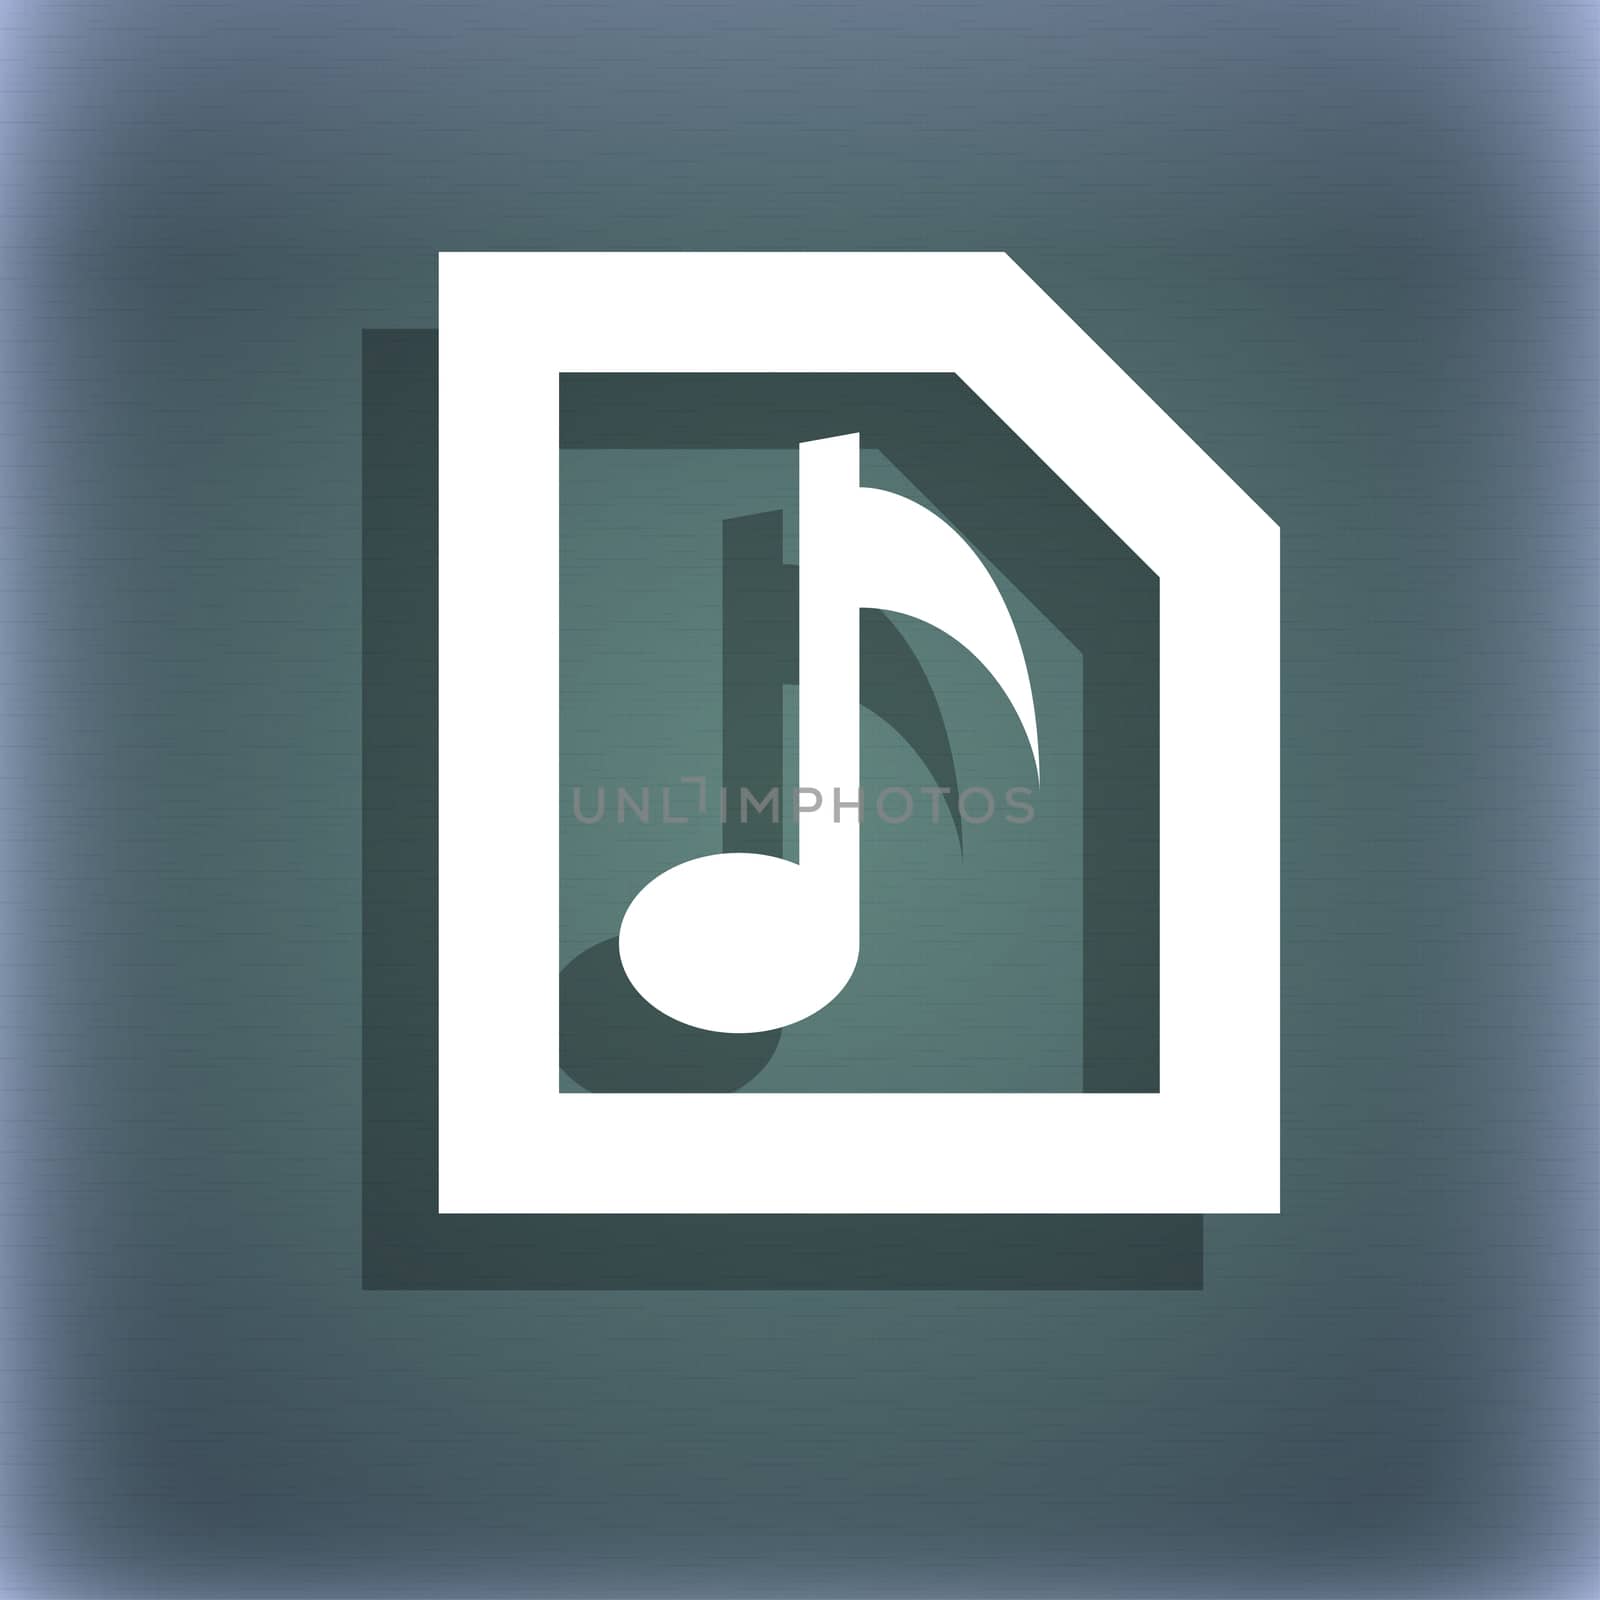 Audio, MP3 file icon symbol on the blue-green abstract background with shadow and space for your text. illustration